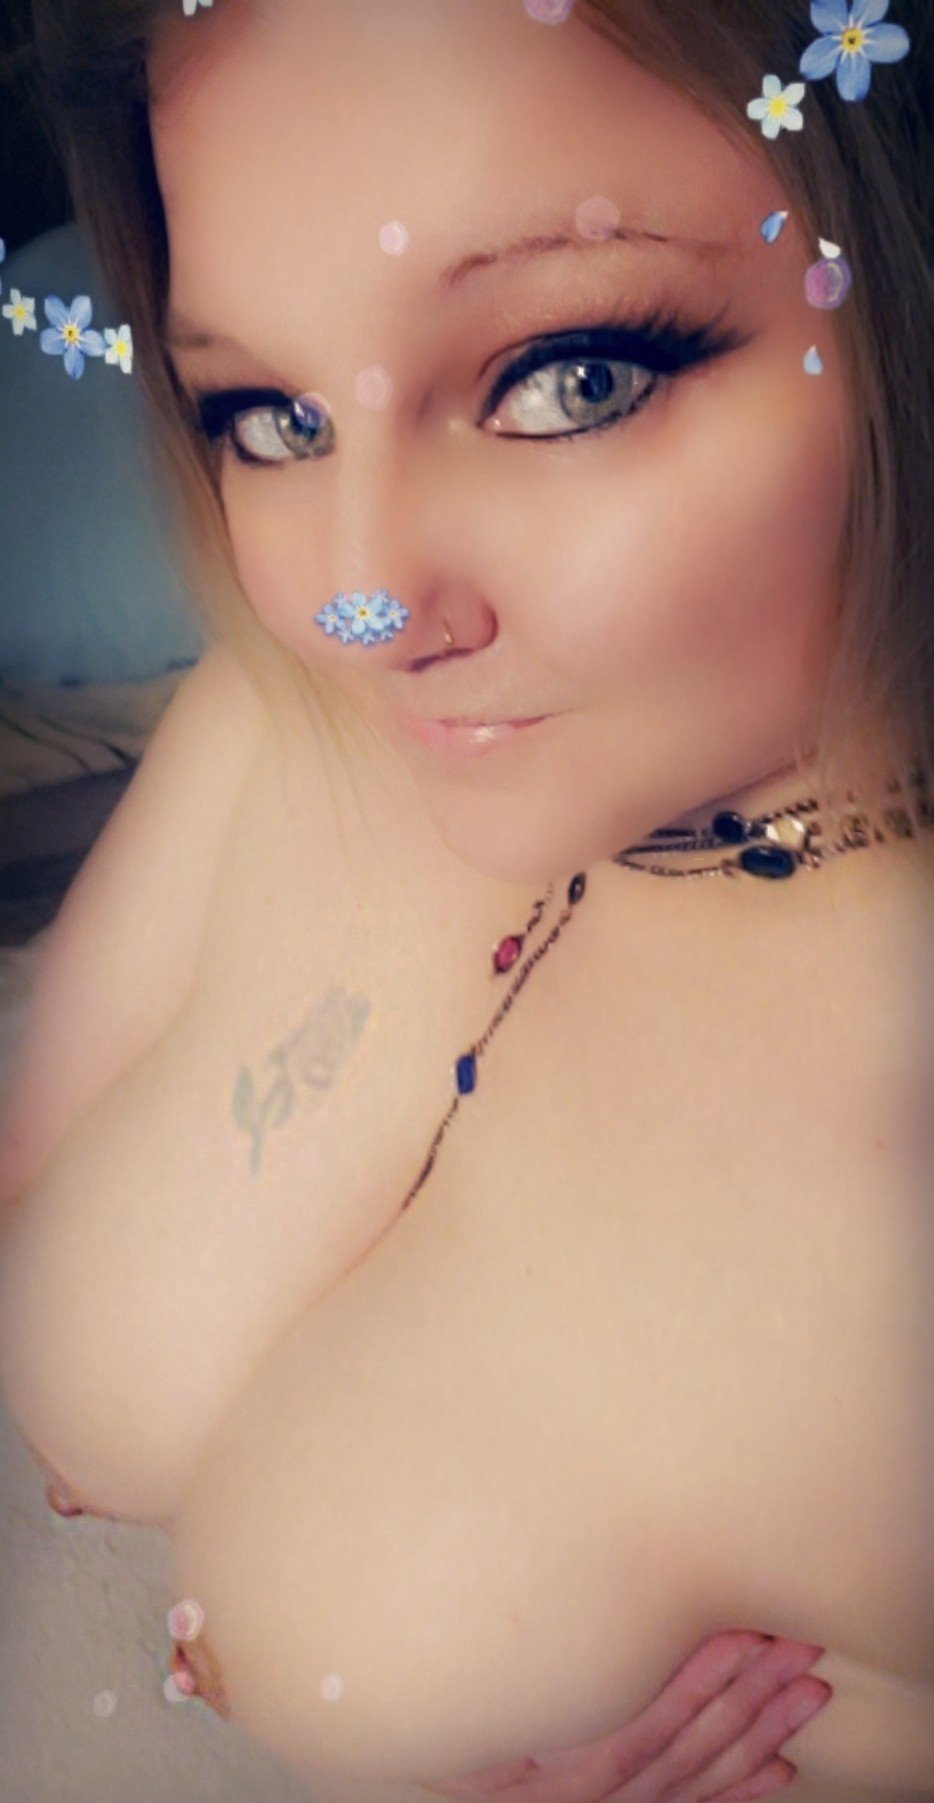 Watch the Photo by MissKittyEyes with the username @MissKittyEyes, posted on August 12, 2019. The post is about the topic Amateurs. and the text says 'Boobies😏😬🐱
#sexy #kitten #kitty #erotic #boobies #tits #amateur'